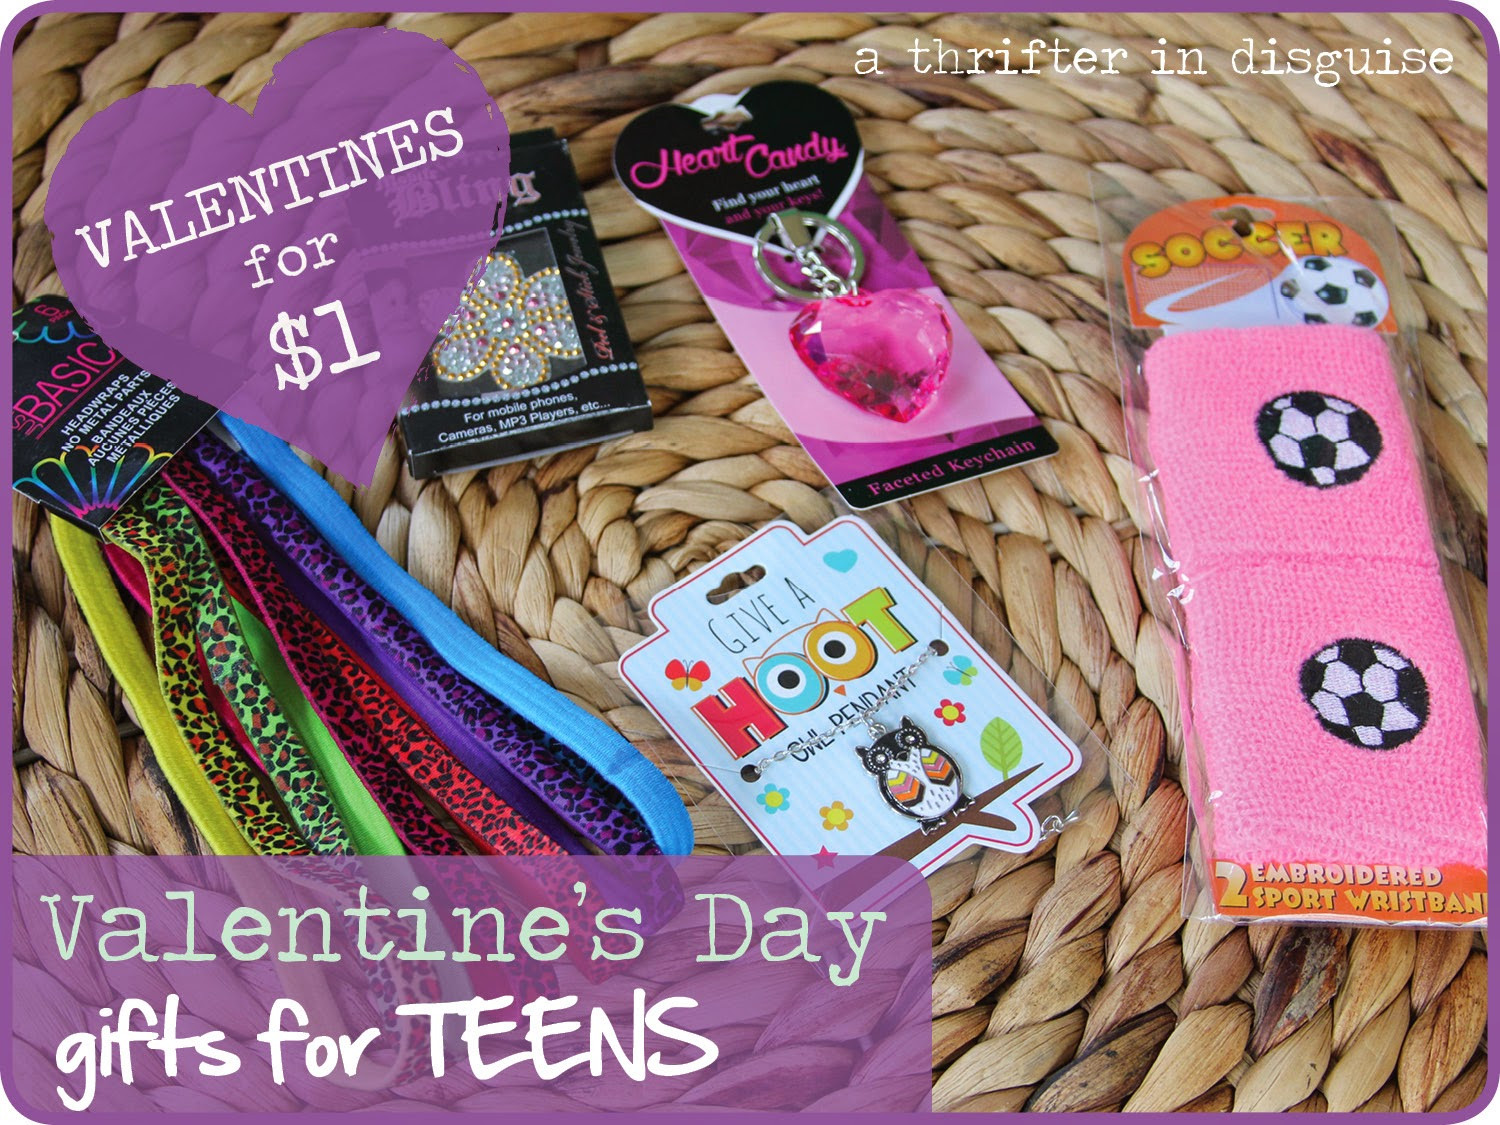 Valentines Gift Ideas For Girls
 A Thrifter in Disguise More $1 Valentine s Day Gifts